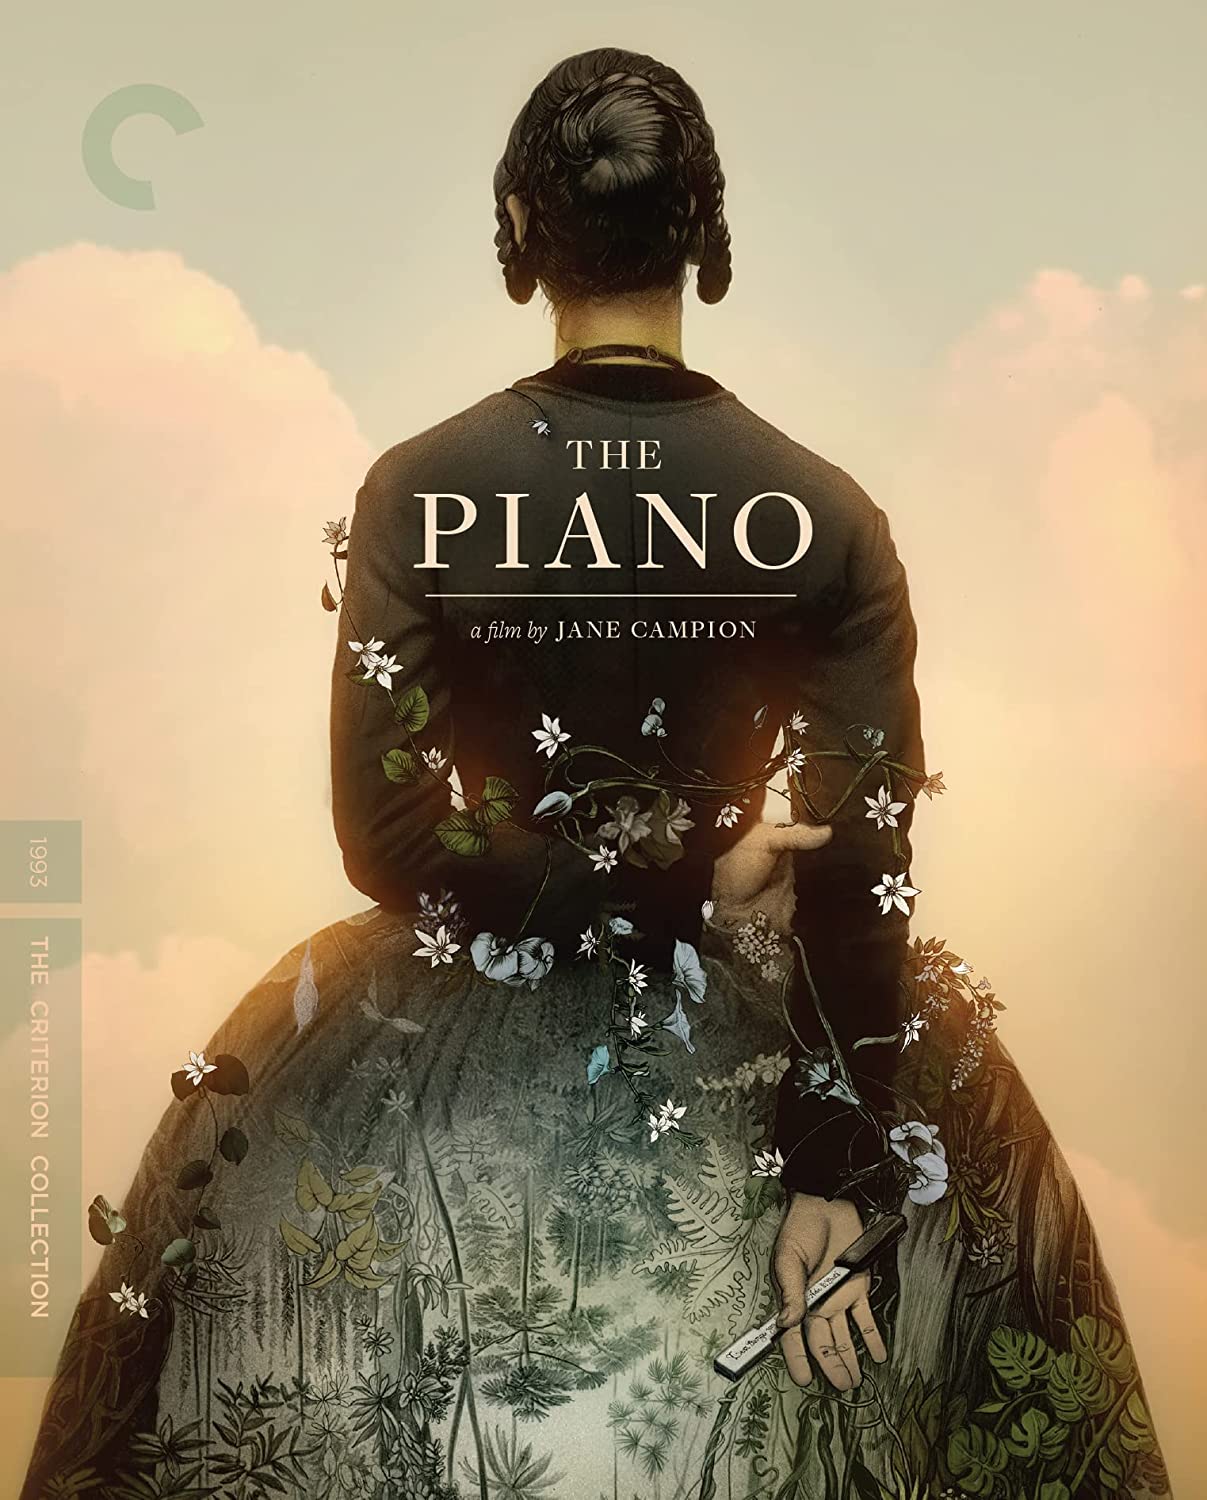 The Piano The Criterion Collection 4k Blu-ray